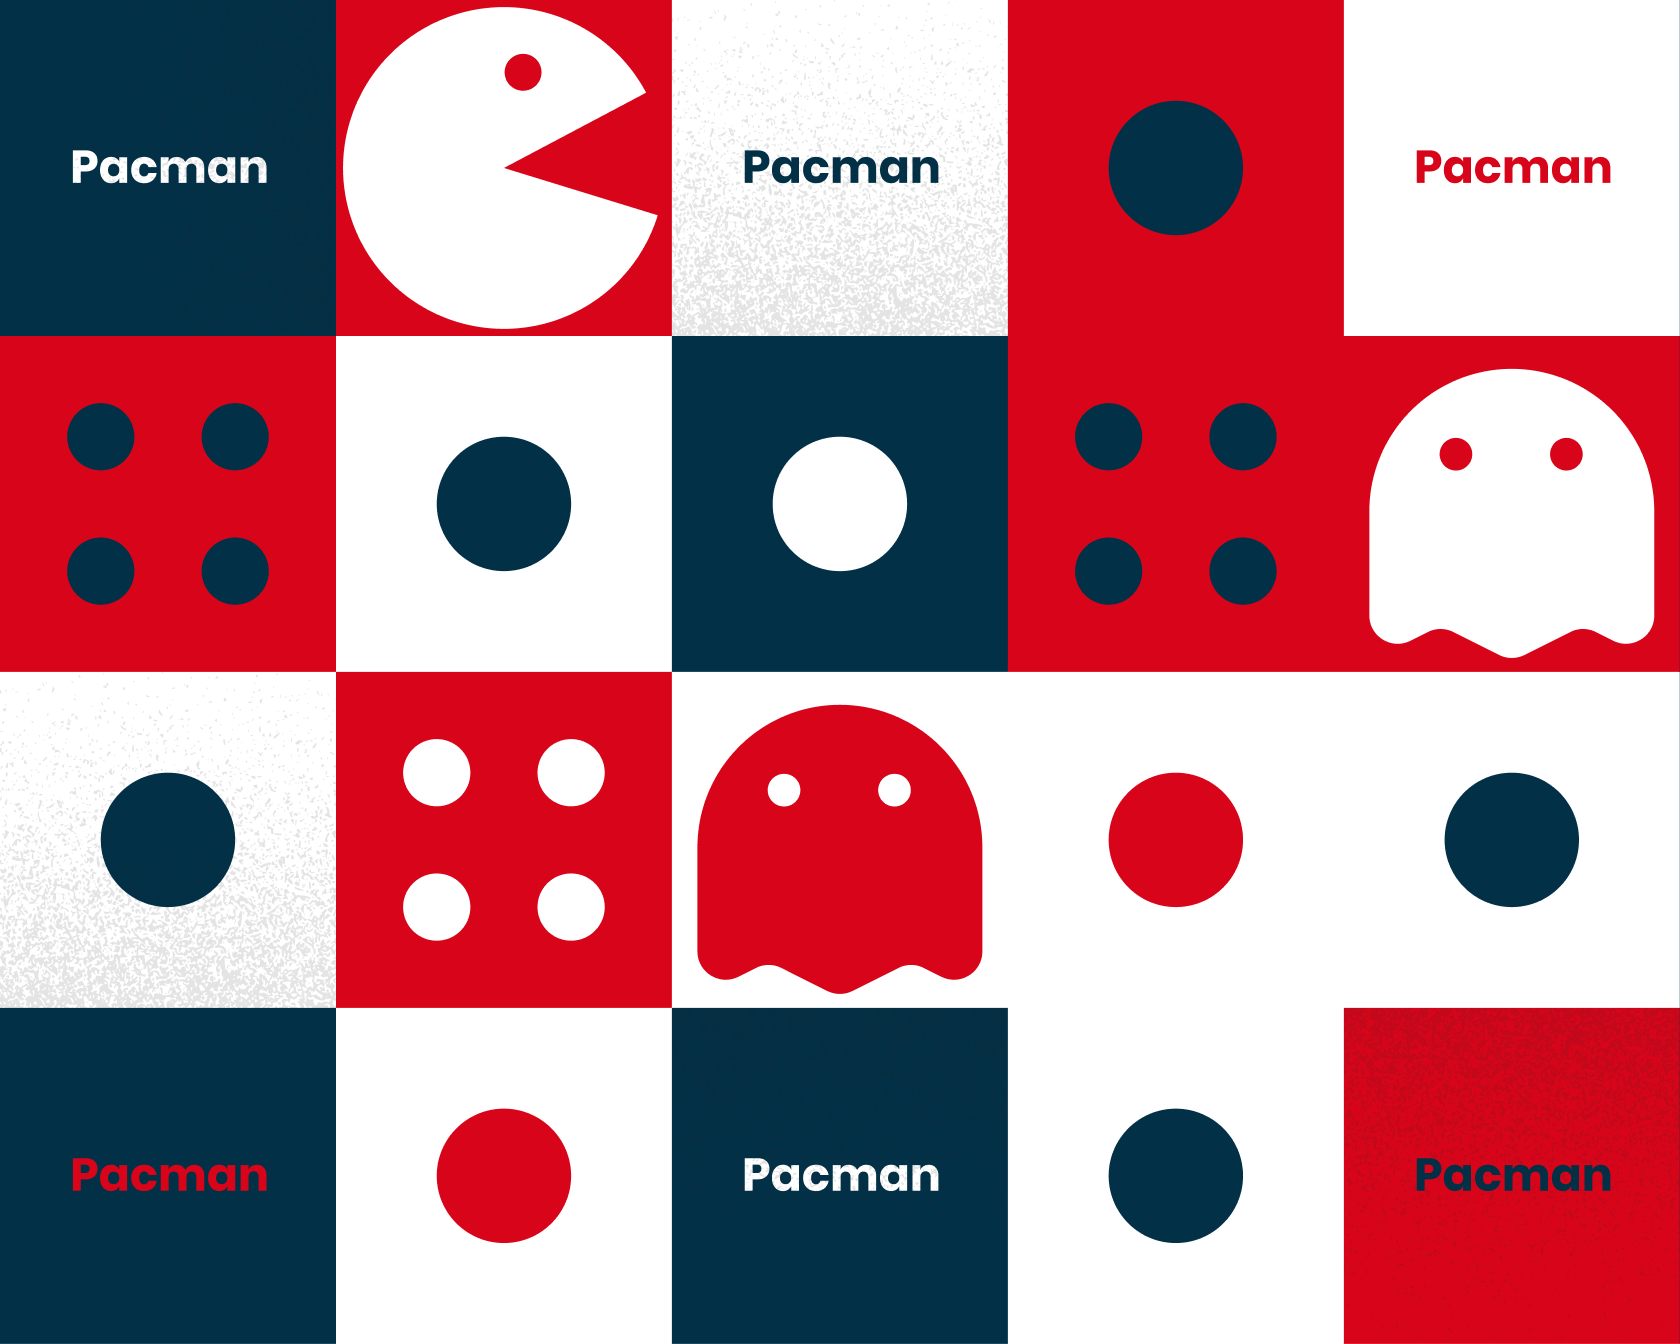 Packman retro template, fun and positive format for whiteboard and remote creative teams.